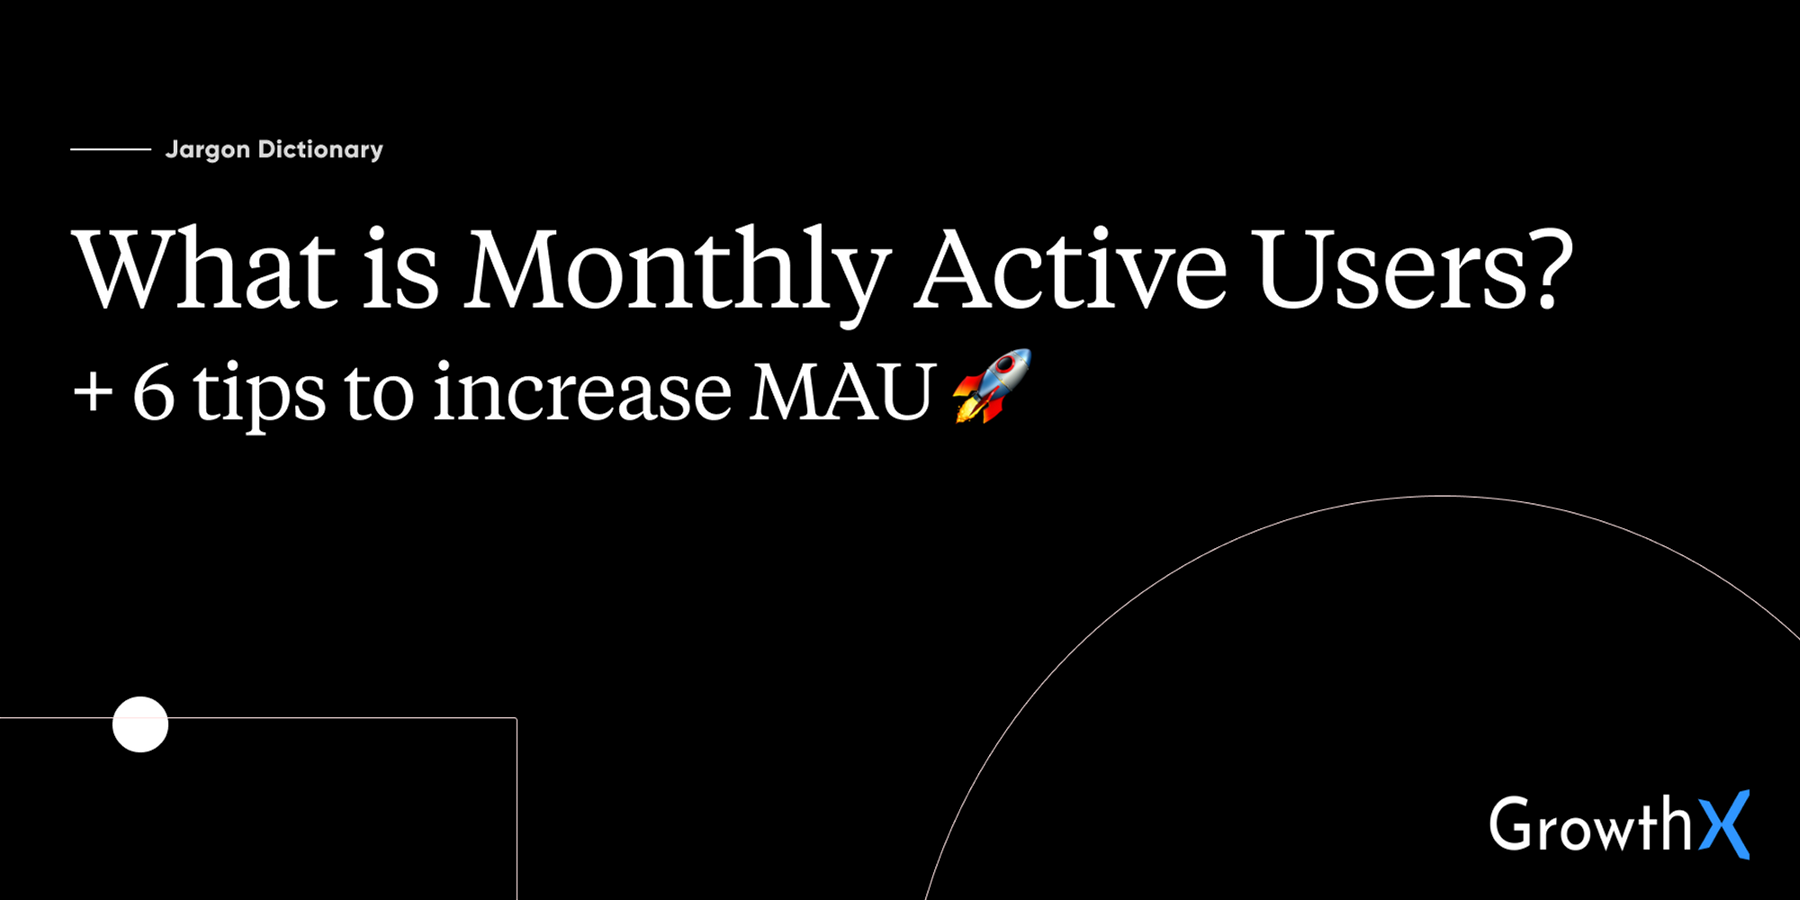 Who are Monthly Active Users (MAU)?